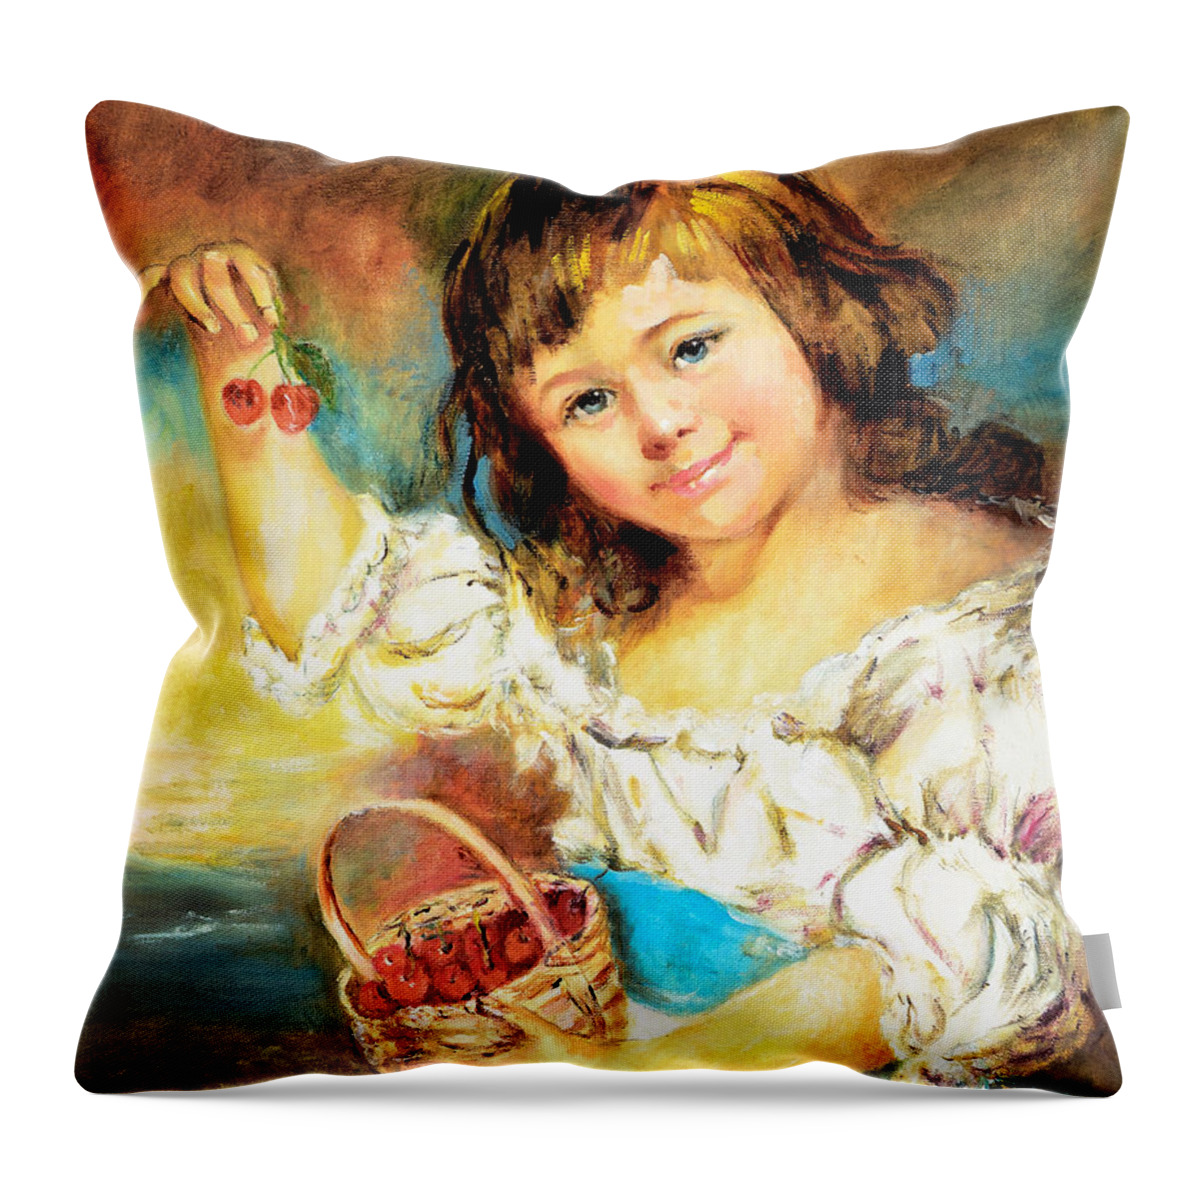 Girl Throw Pillow featuring the painting Cherry Basket girl by Sher Nasser